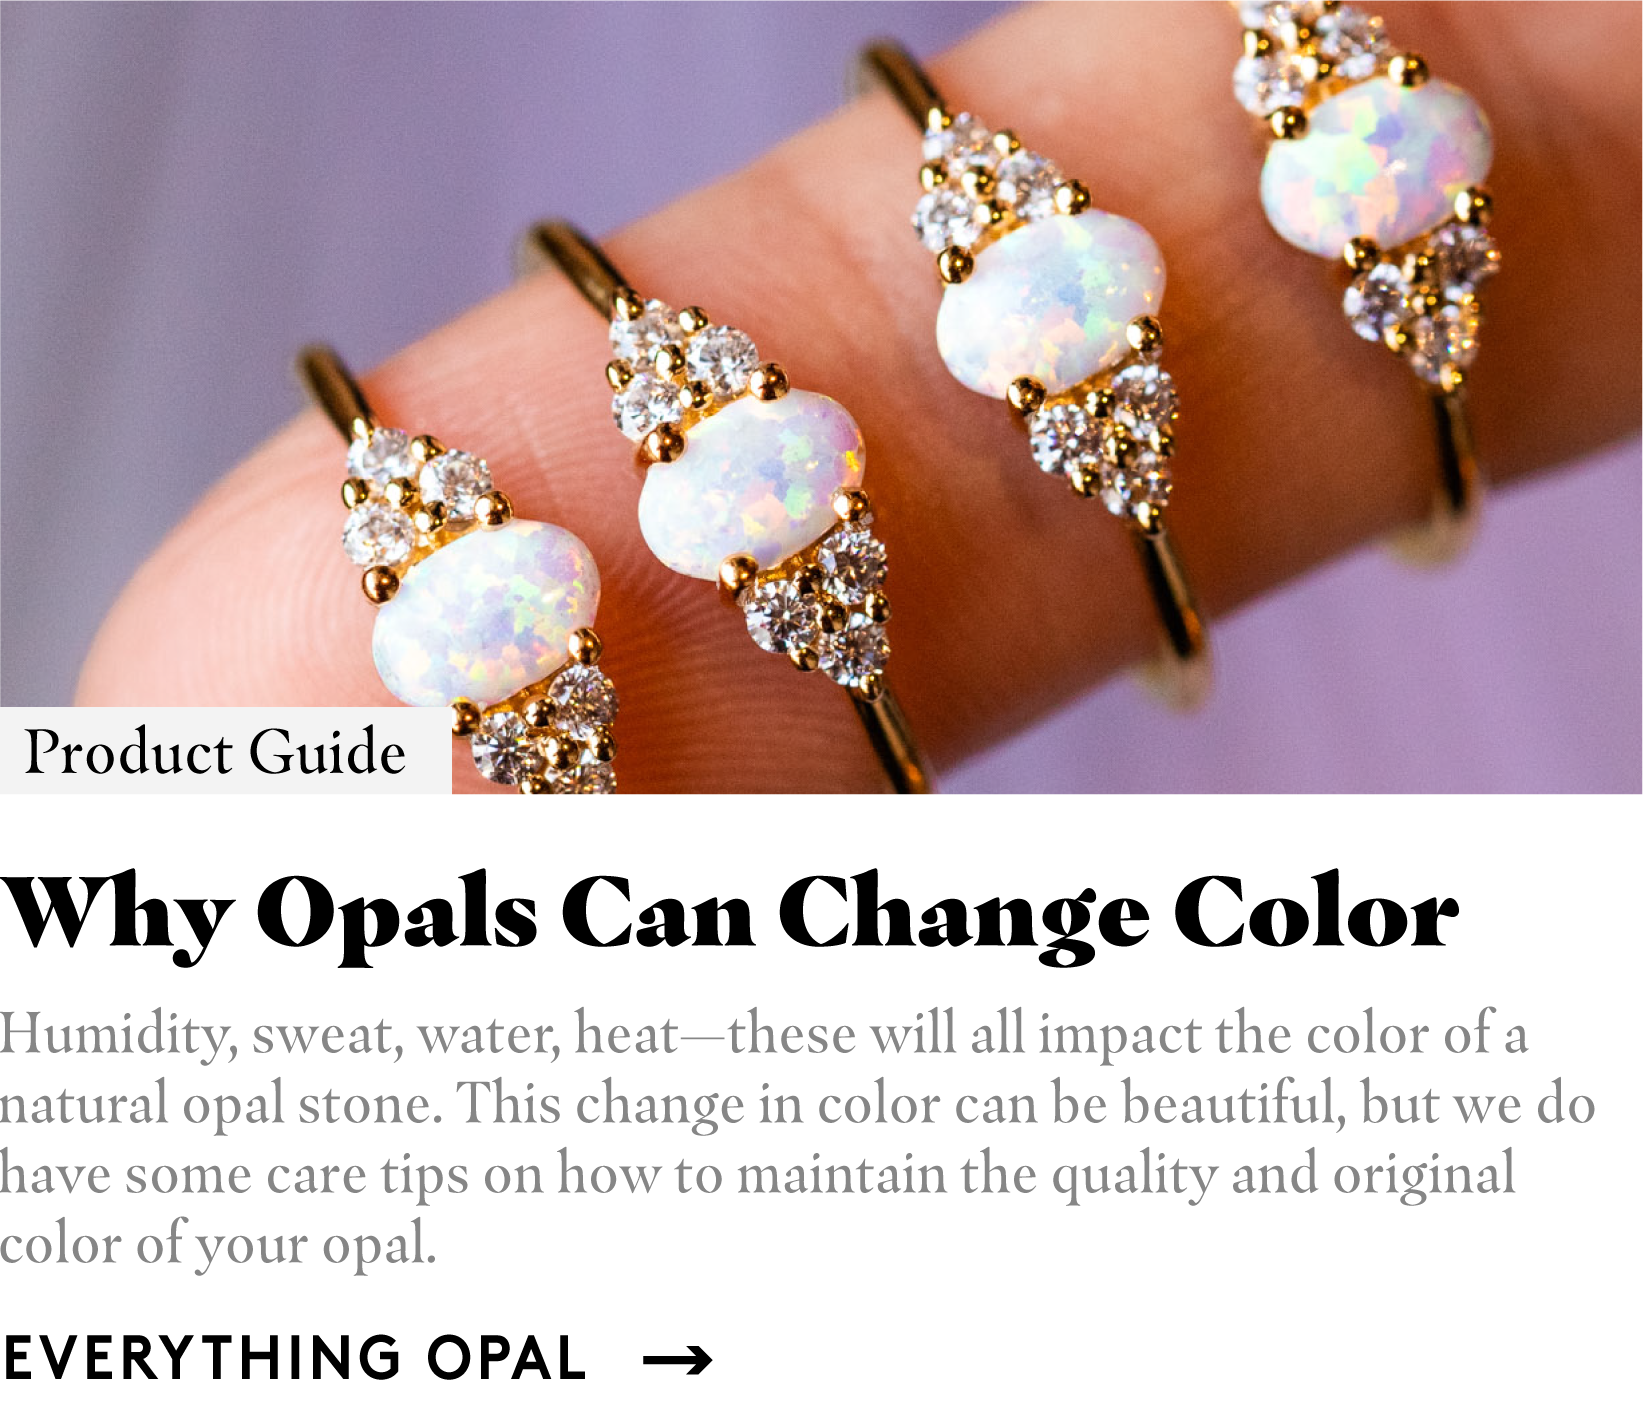 Why opals can change color